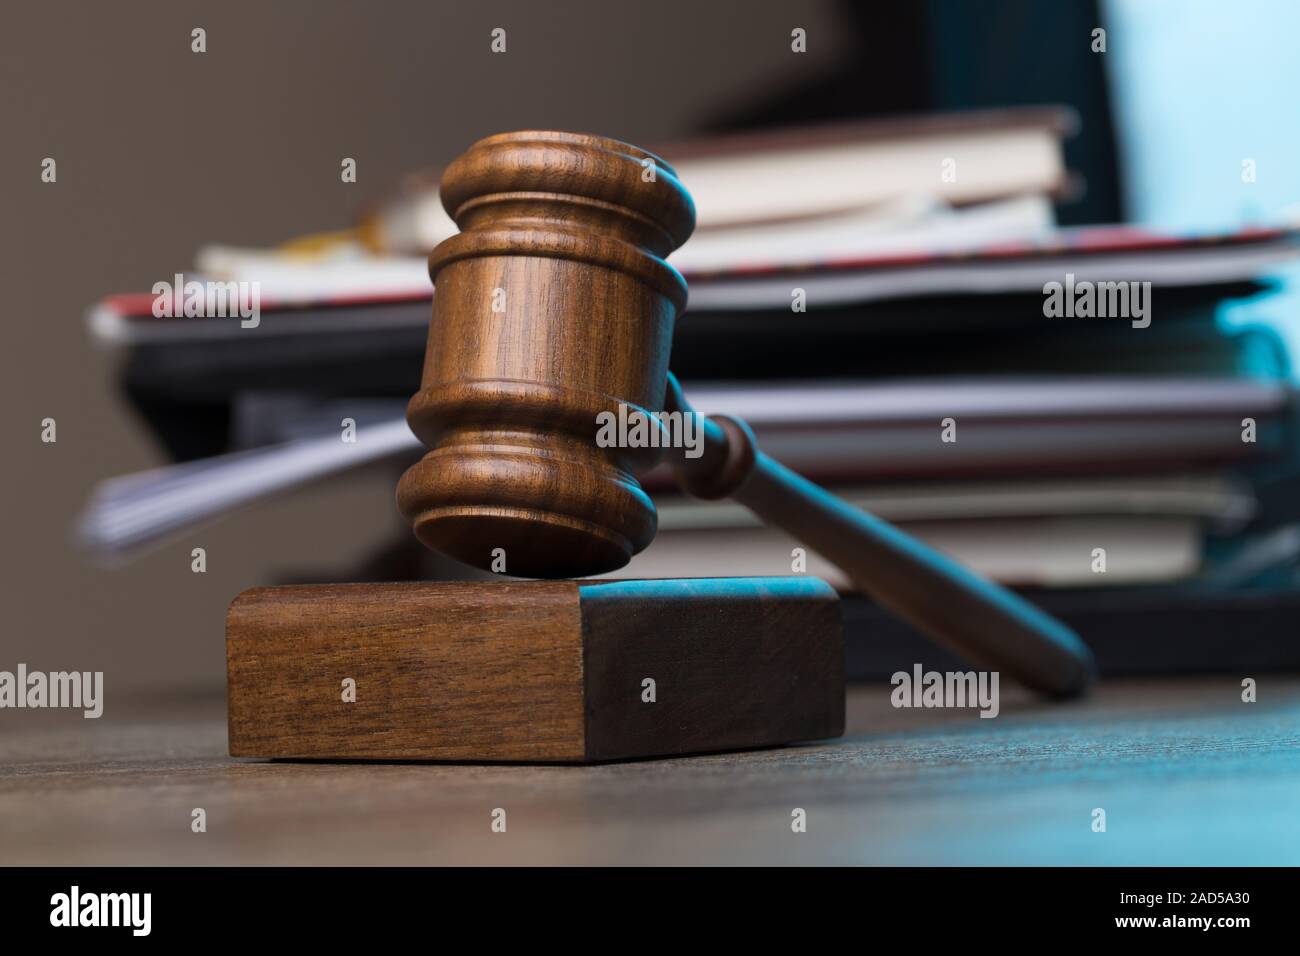 Hammer, paper lies on table Stock Photo